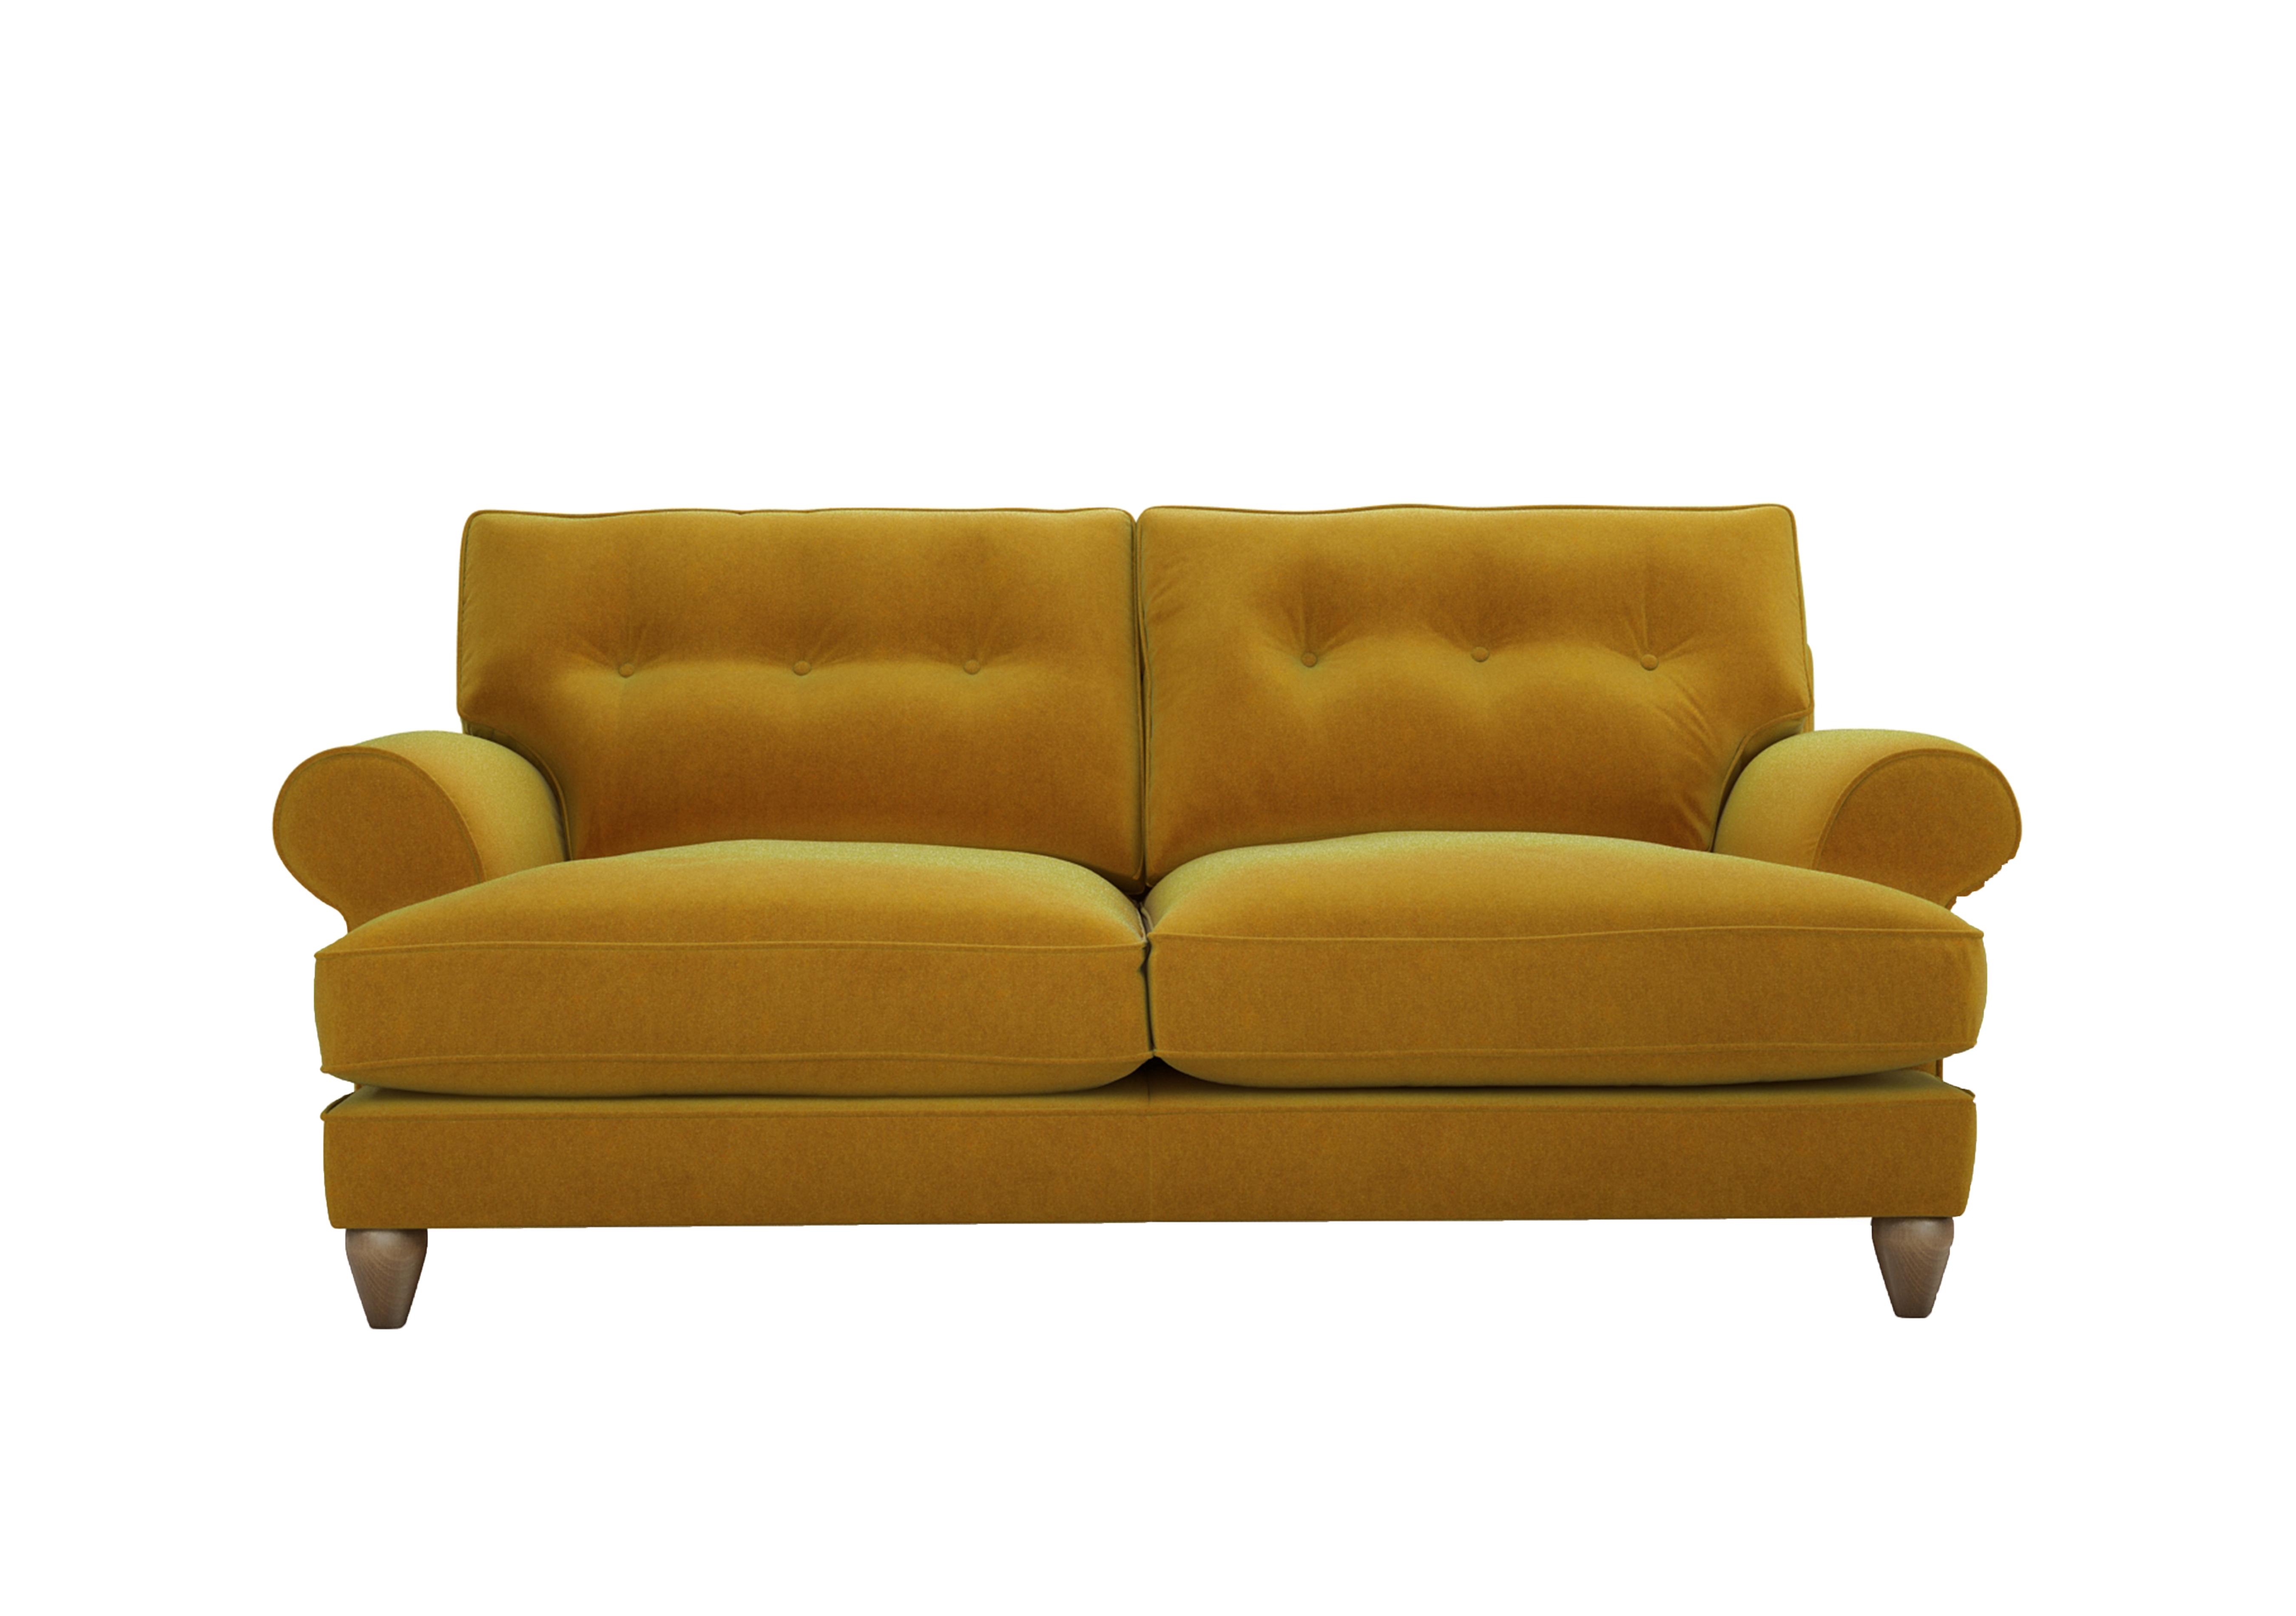 Bronwyn 3 Seater Fabric Classic Back Sofa in Gol204 Golden Spice on Furniture Village